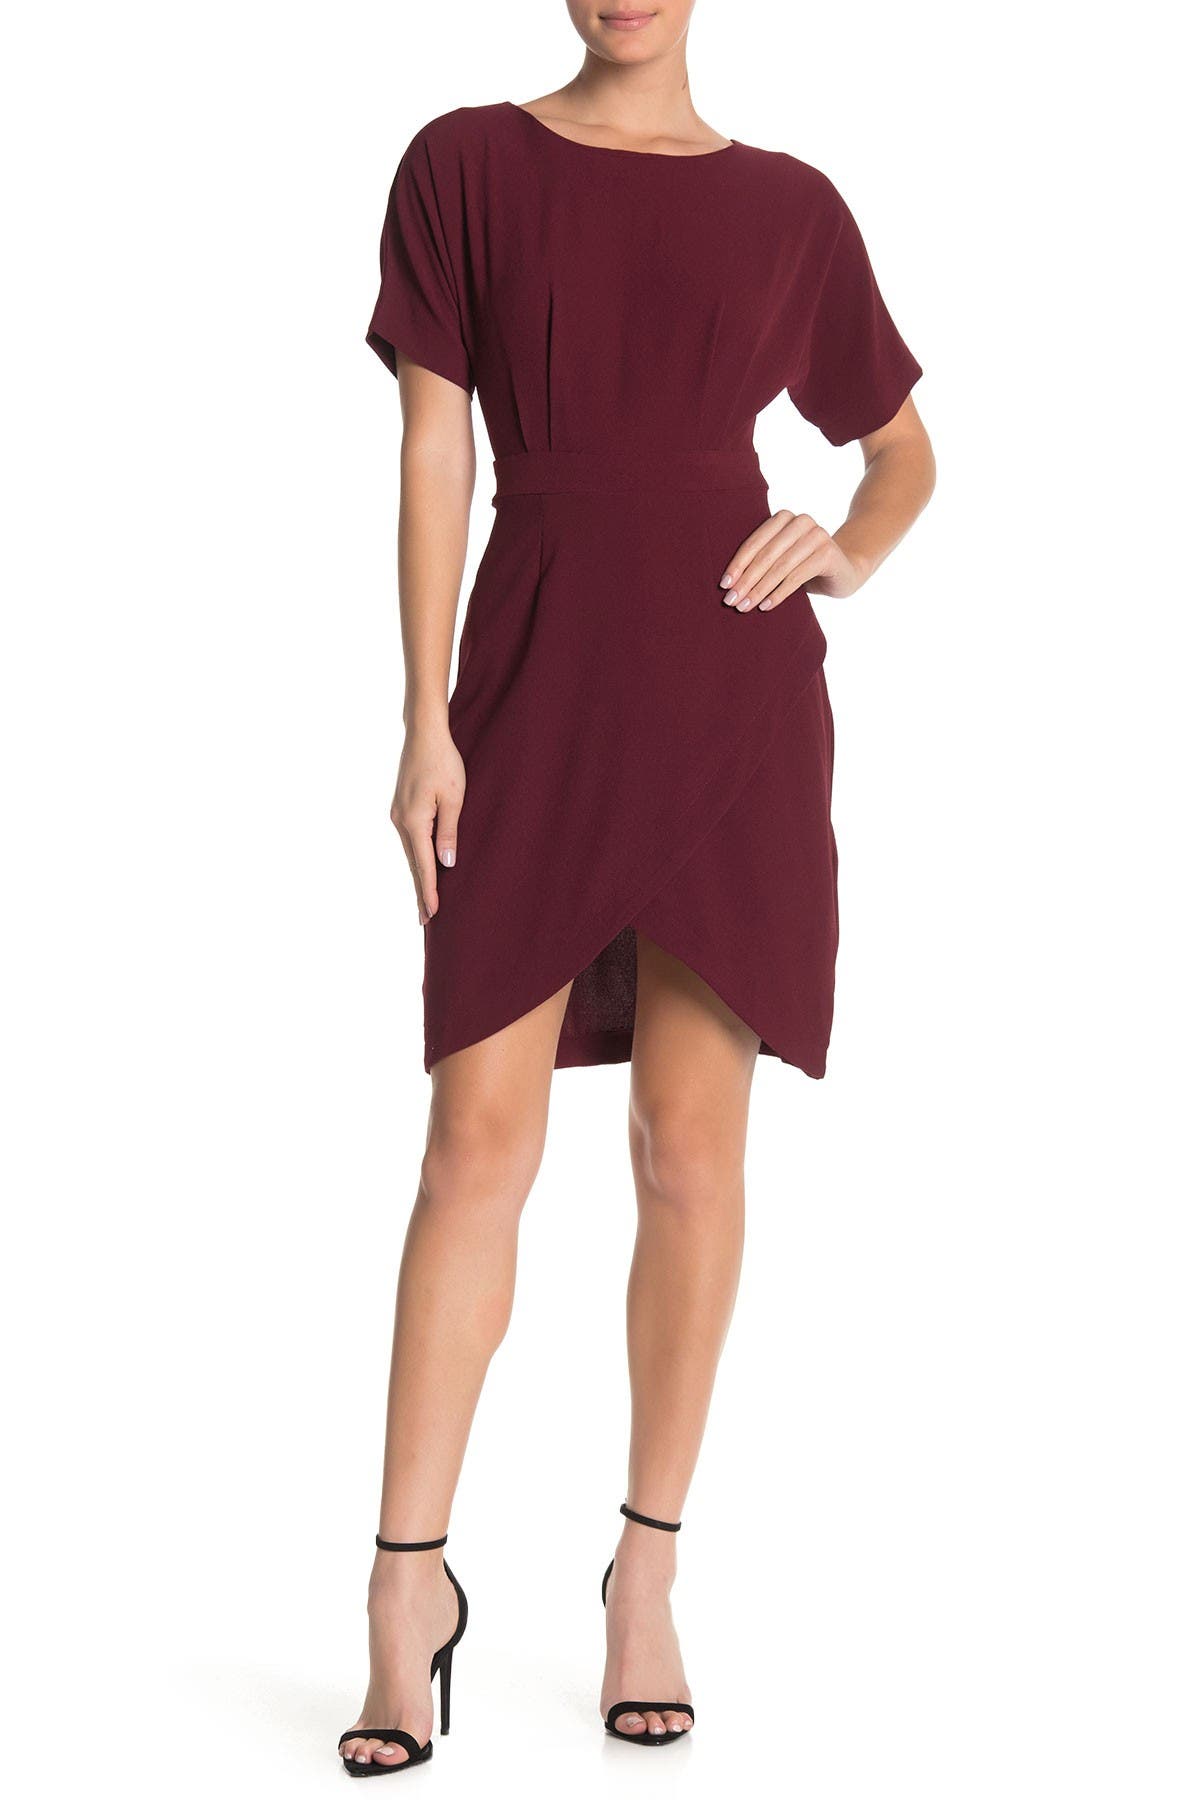 wrap cocktail dresses with sleeves